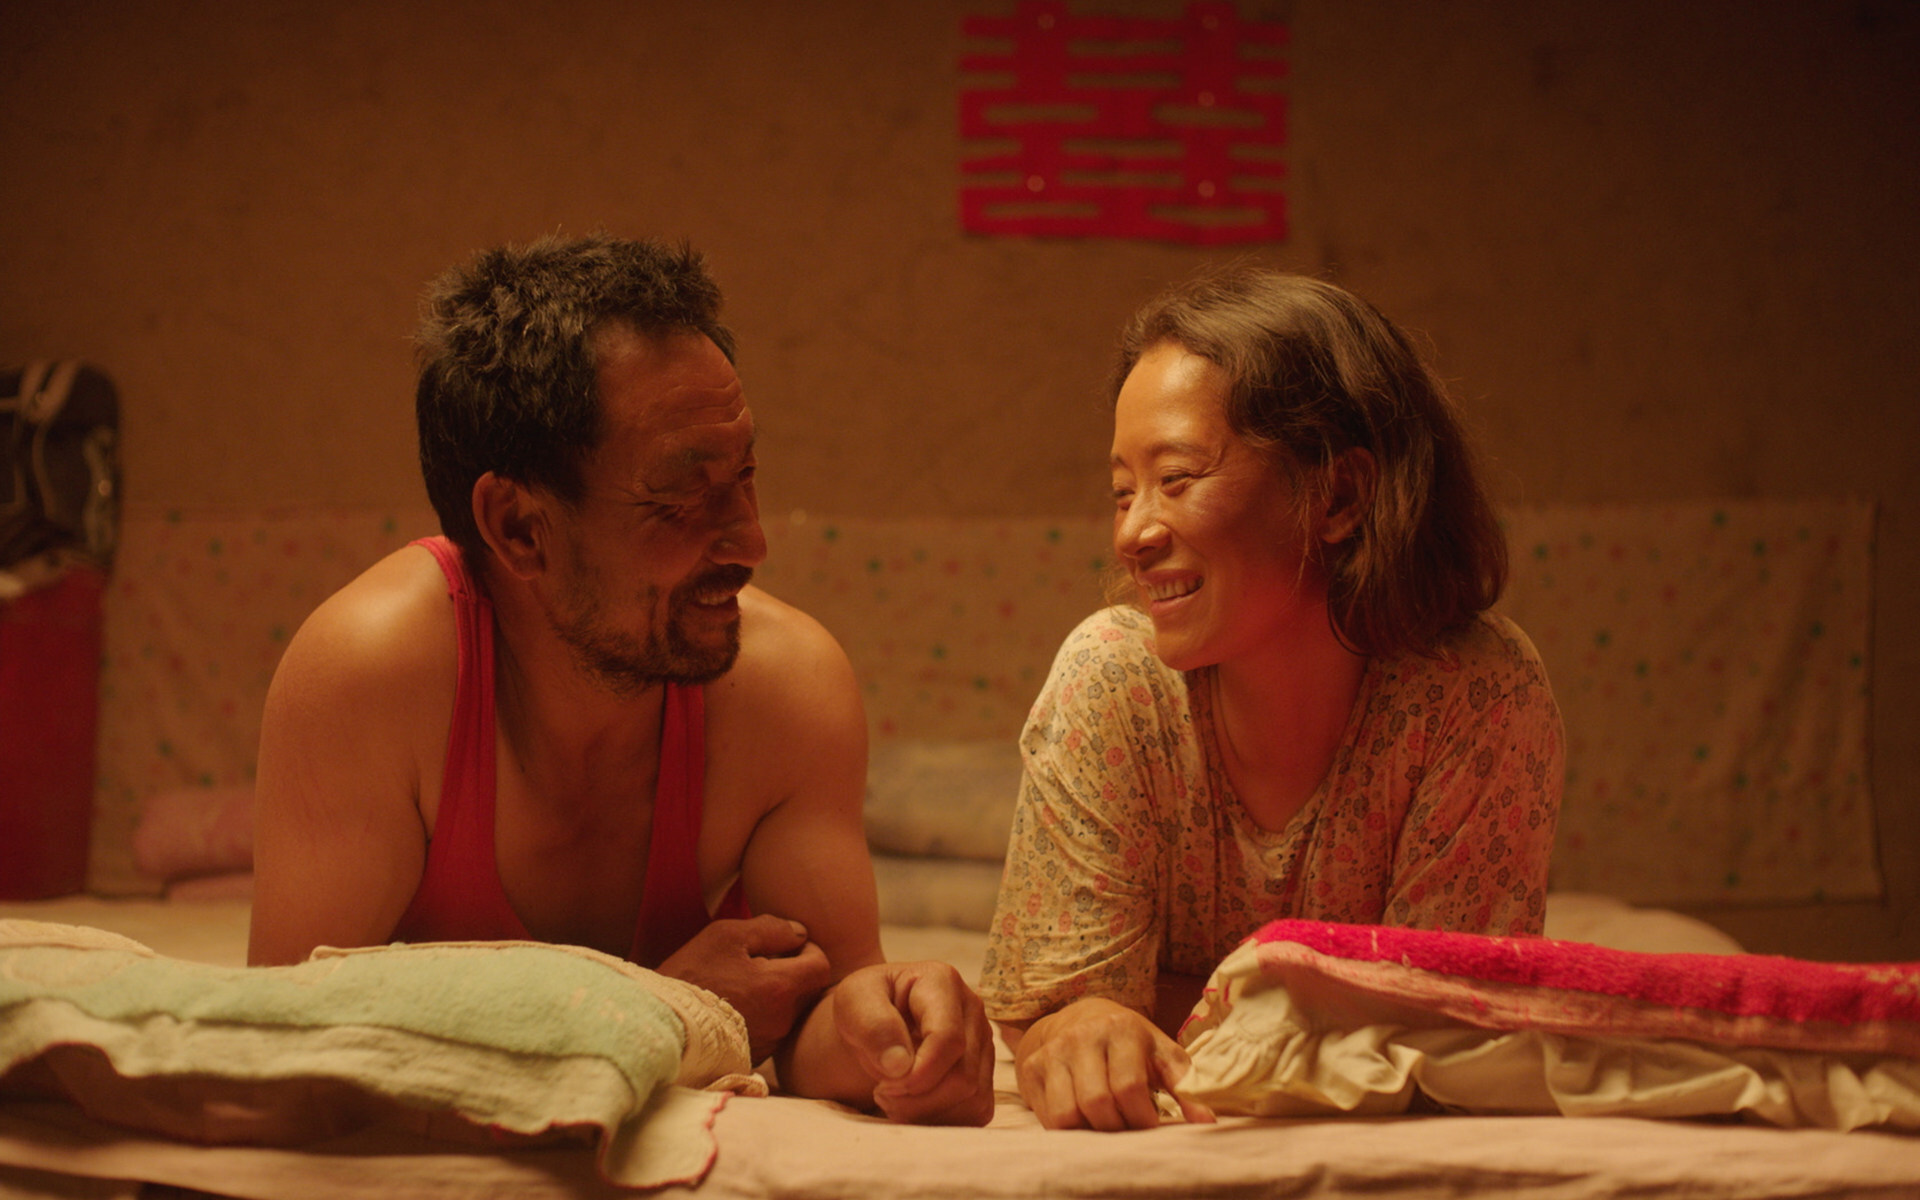 Wu Renlin (left) and Hai Qing in a still from Return to Dust. Photo: Hucheng No 7 Films Ltd